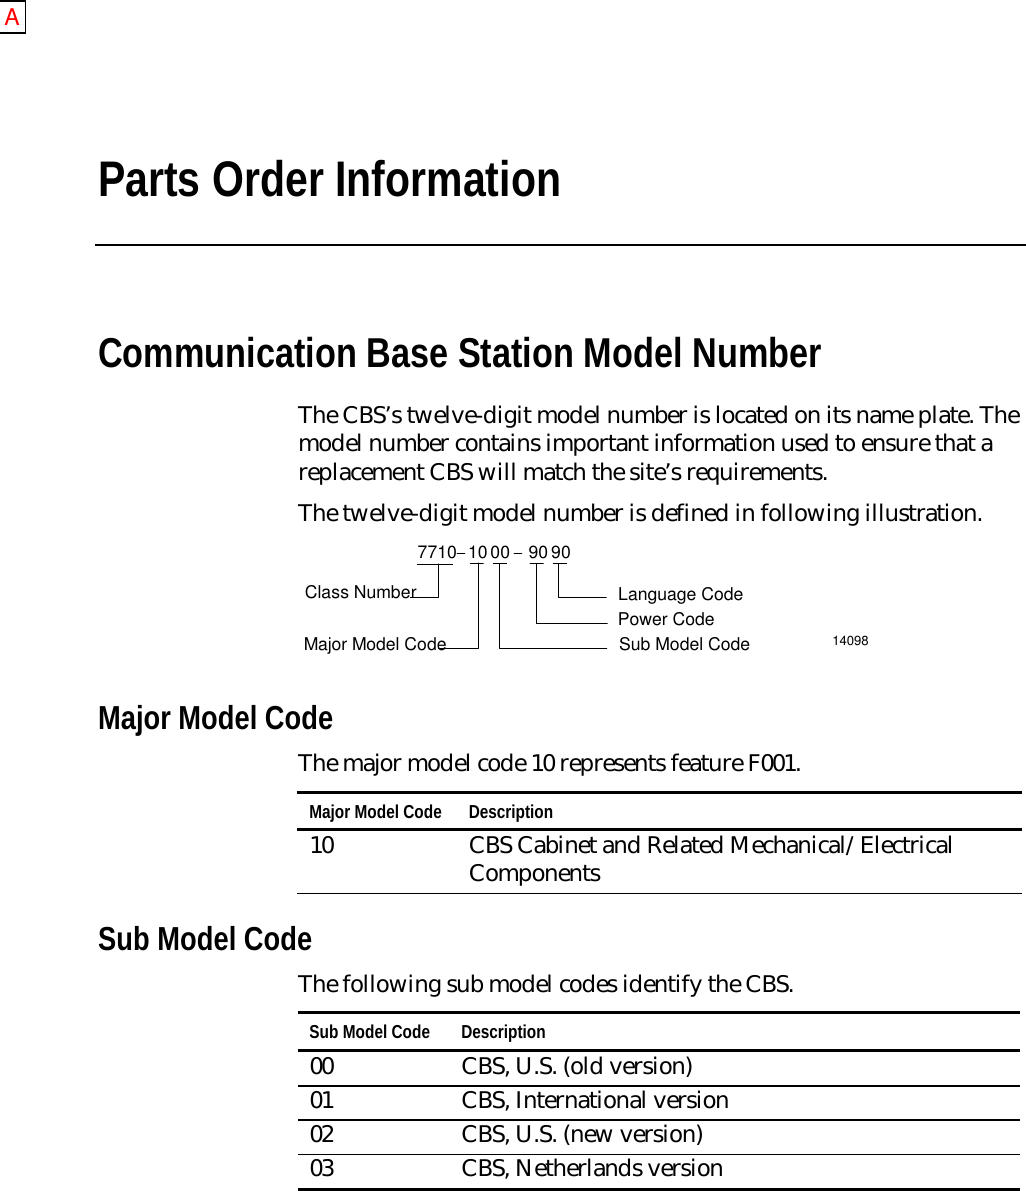 Parts Order InformationCommunication Base Station Model NumberThe CBS’s twelve-digit model number is located on its name plate. Themodel number contains important information used to ensure that areplacement CBS will match the site’s requirements.The twelve-digit model number is defined in following illustration.140987710 10 90 9000Language CodeMajor Model CodeClass NumberSub Model CodePower CodeMajor Model CodeThe major model code 10 represents feature F001.Major Model Code Description10 CBS Cabinet and Related Mechanical/ElectricalComponentsSub Model CodeThe following sub model codes identify the CBS.Sub Model Code Description00 CBS, U.S. (old version)01 CBS, International version02 CBS, U.S. (new version)03 CBS, Netherlands versionA